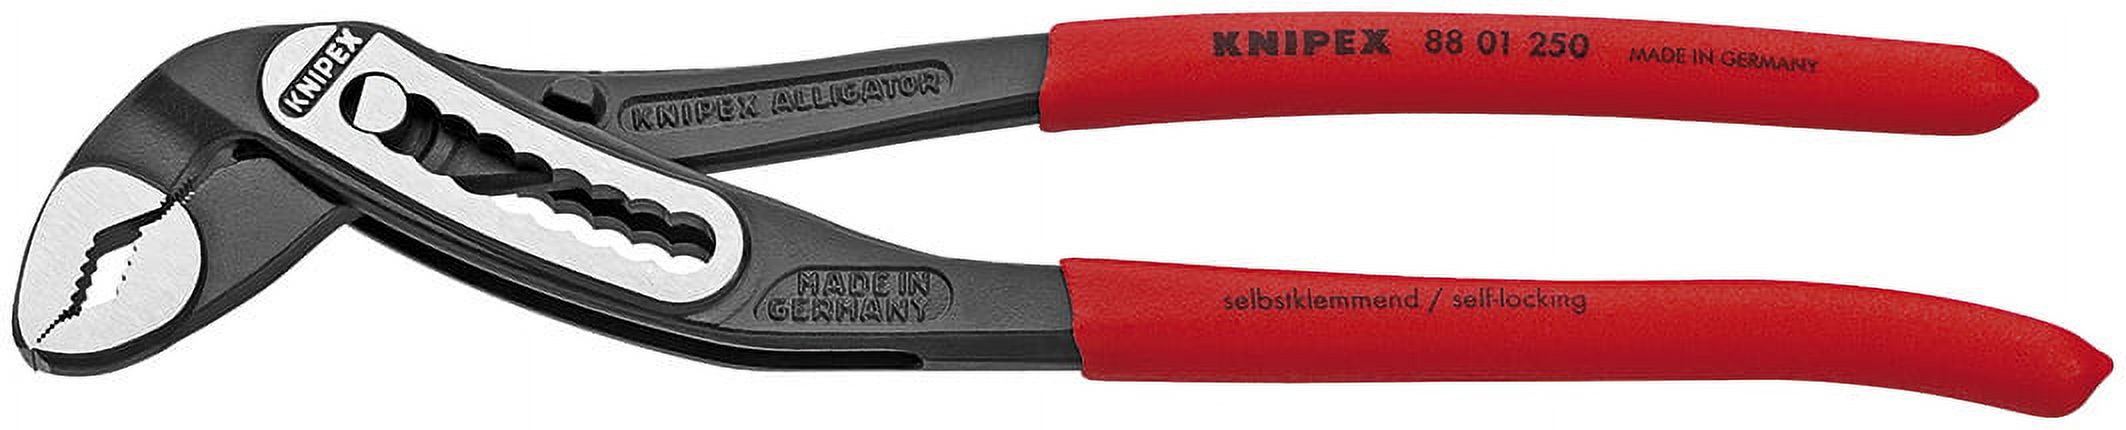 KNIPEX Tools 00 20 08 US1, Long Nose, Diagonal Cutter, and Alligator Pliers Tool Set, 3-Piece - image 5 of 5